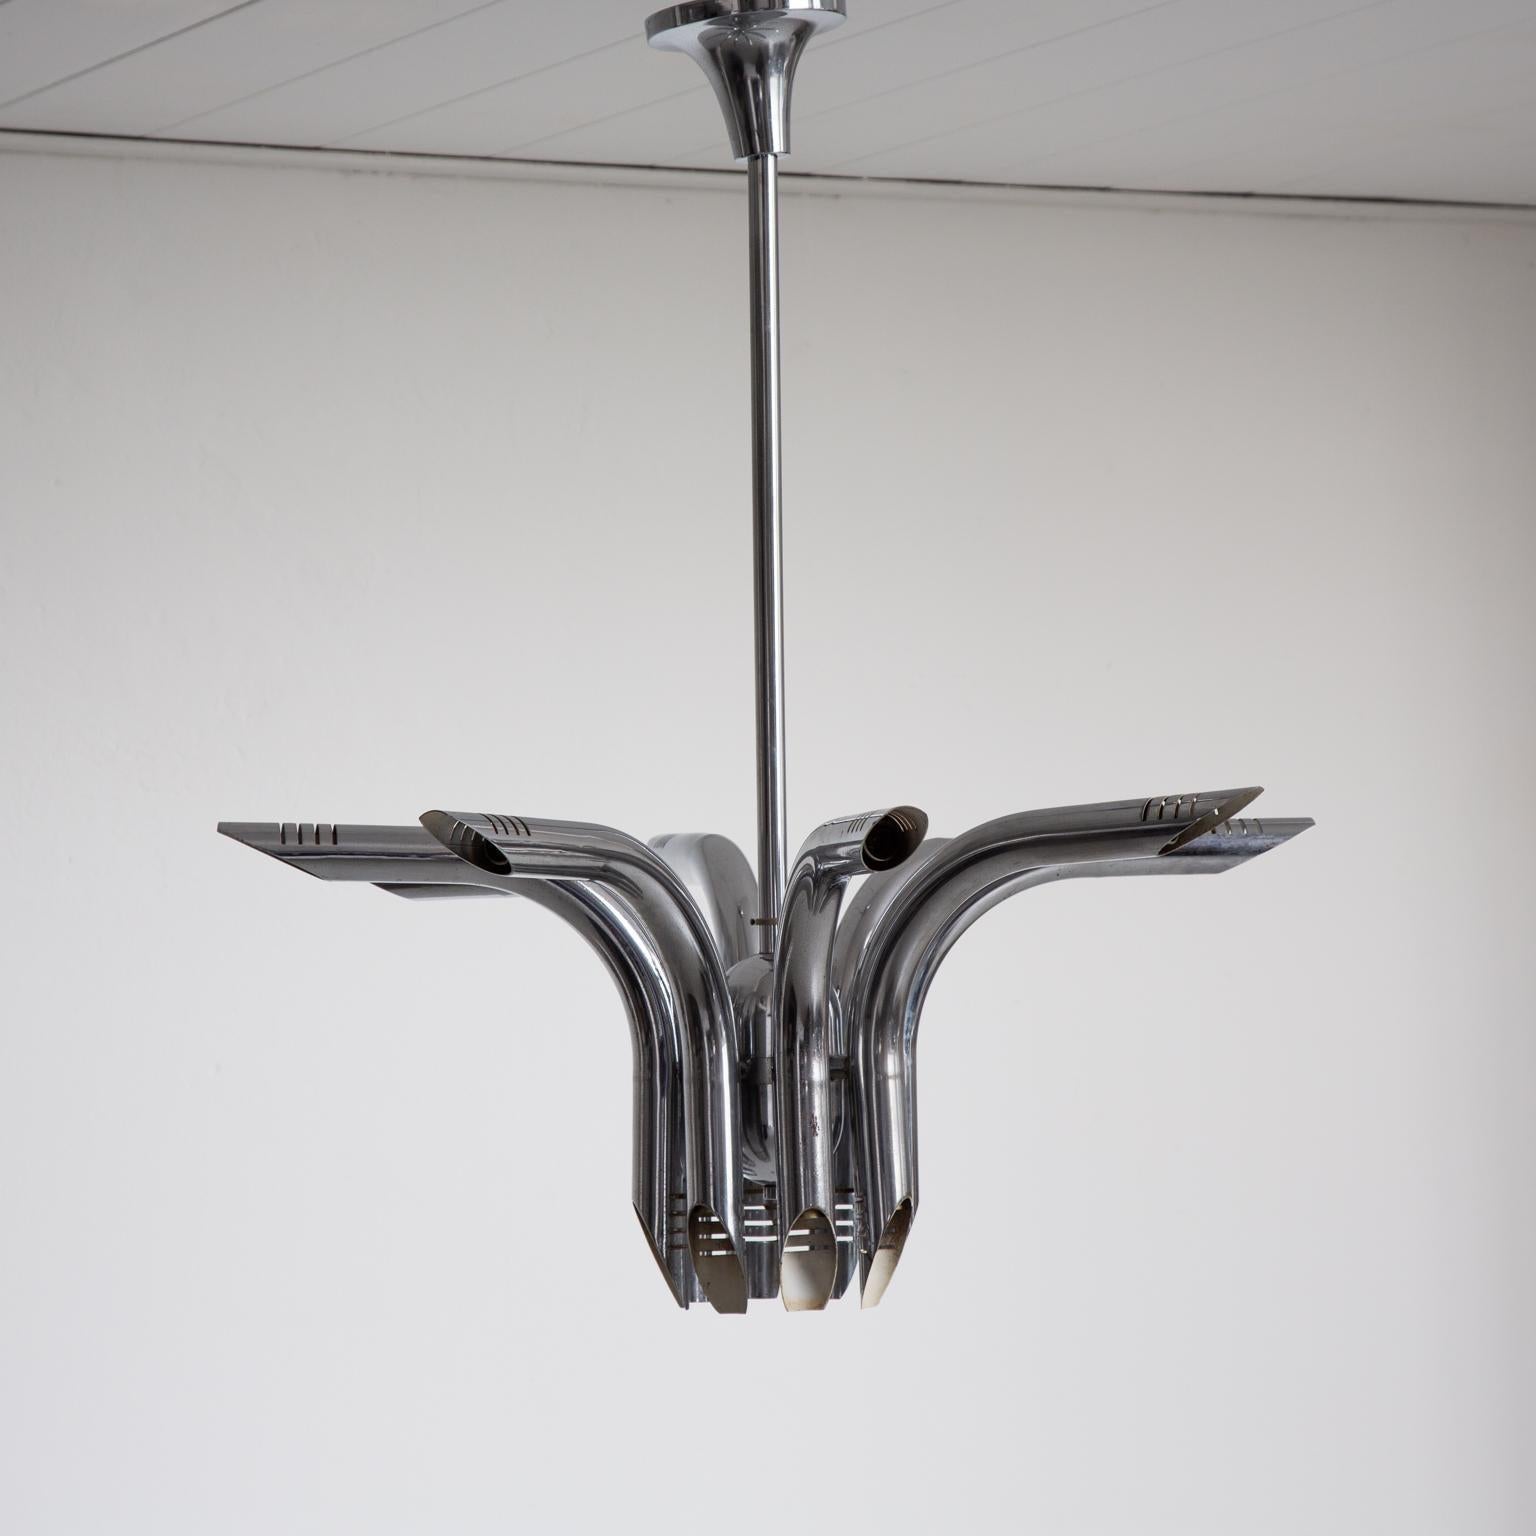 Polychromed Vintage Chromed Steel Pipes Pendant Chandelier, Contemporary Industrial Style For Sale